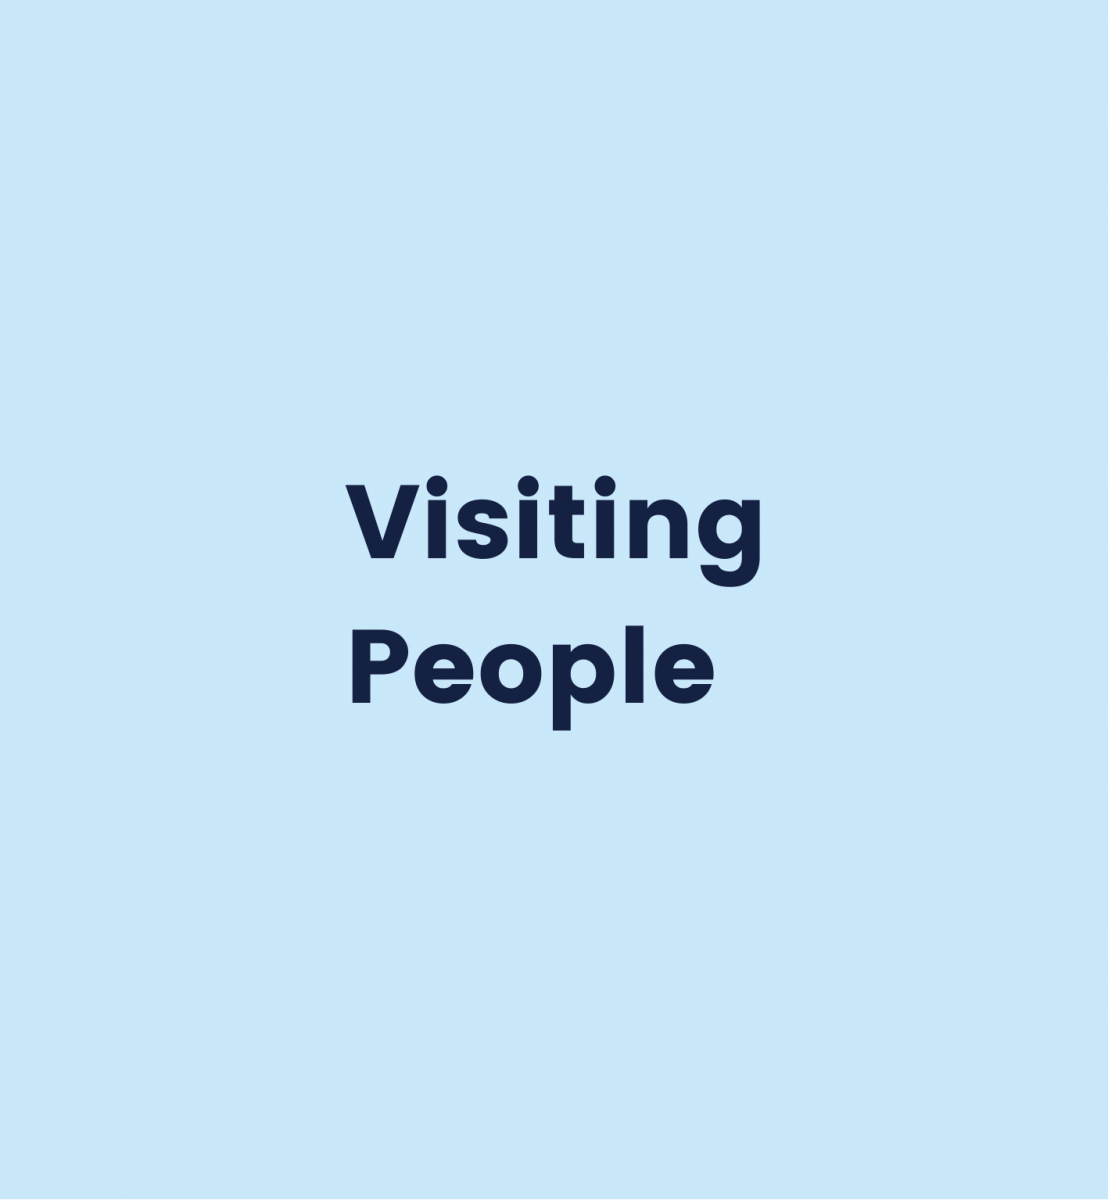 Tab to click through to Visiting People service